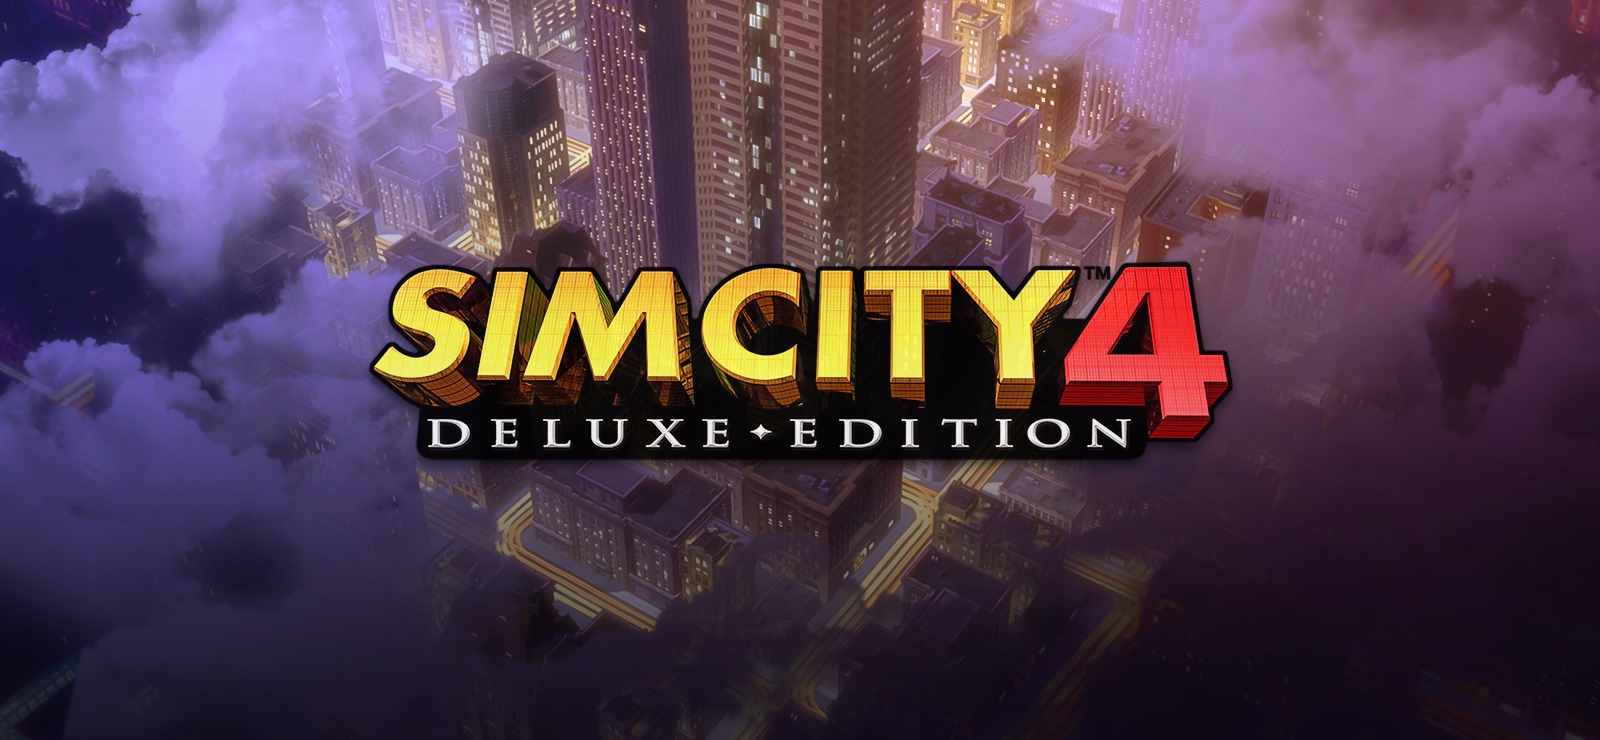 simcity 4 deluxe edition download free full version pc